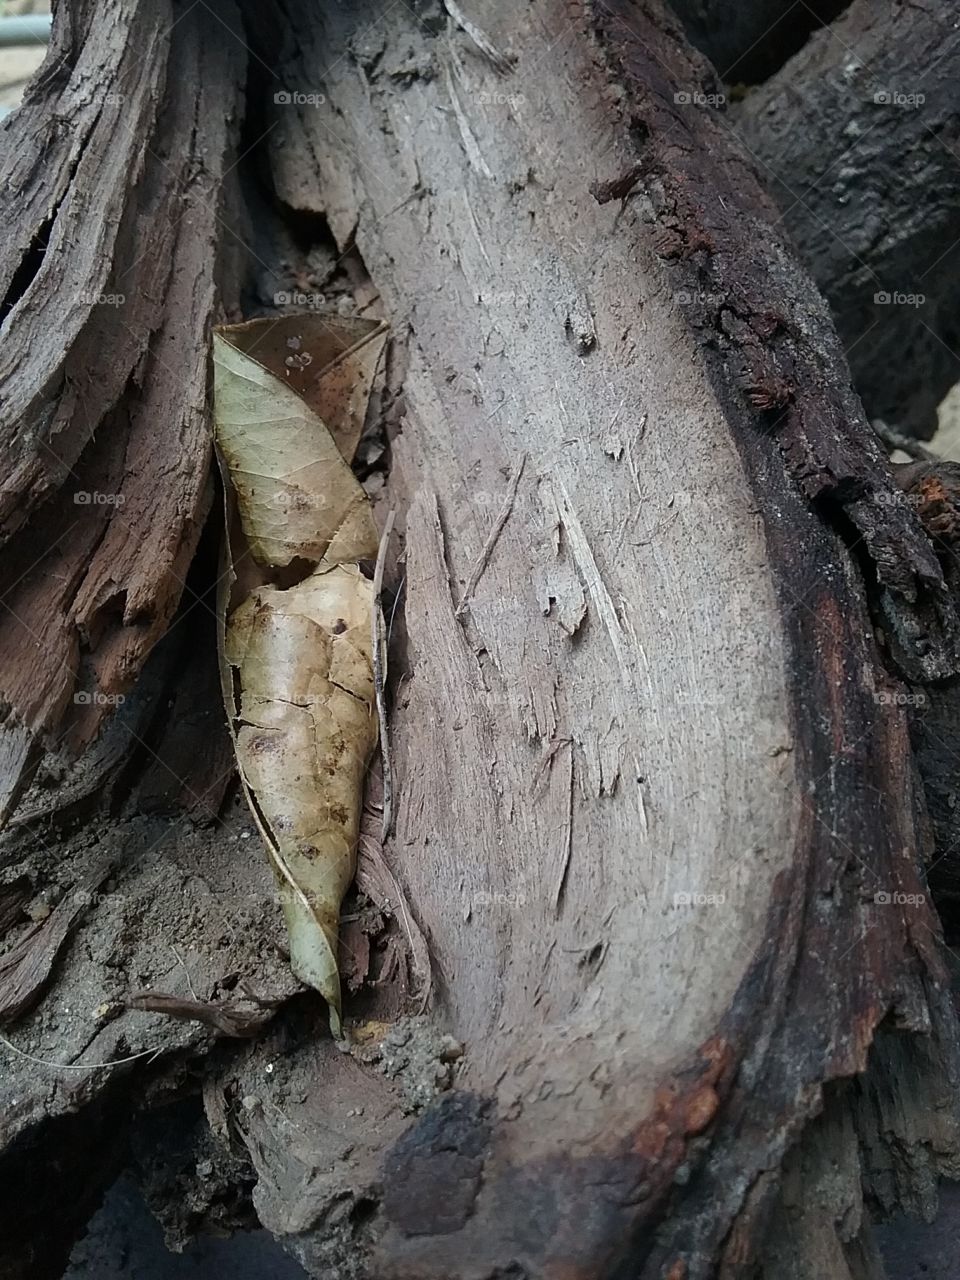 This is one of the old roots I have around the house that I found out by the river.